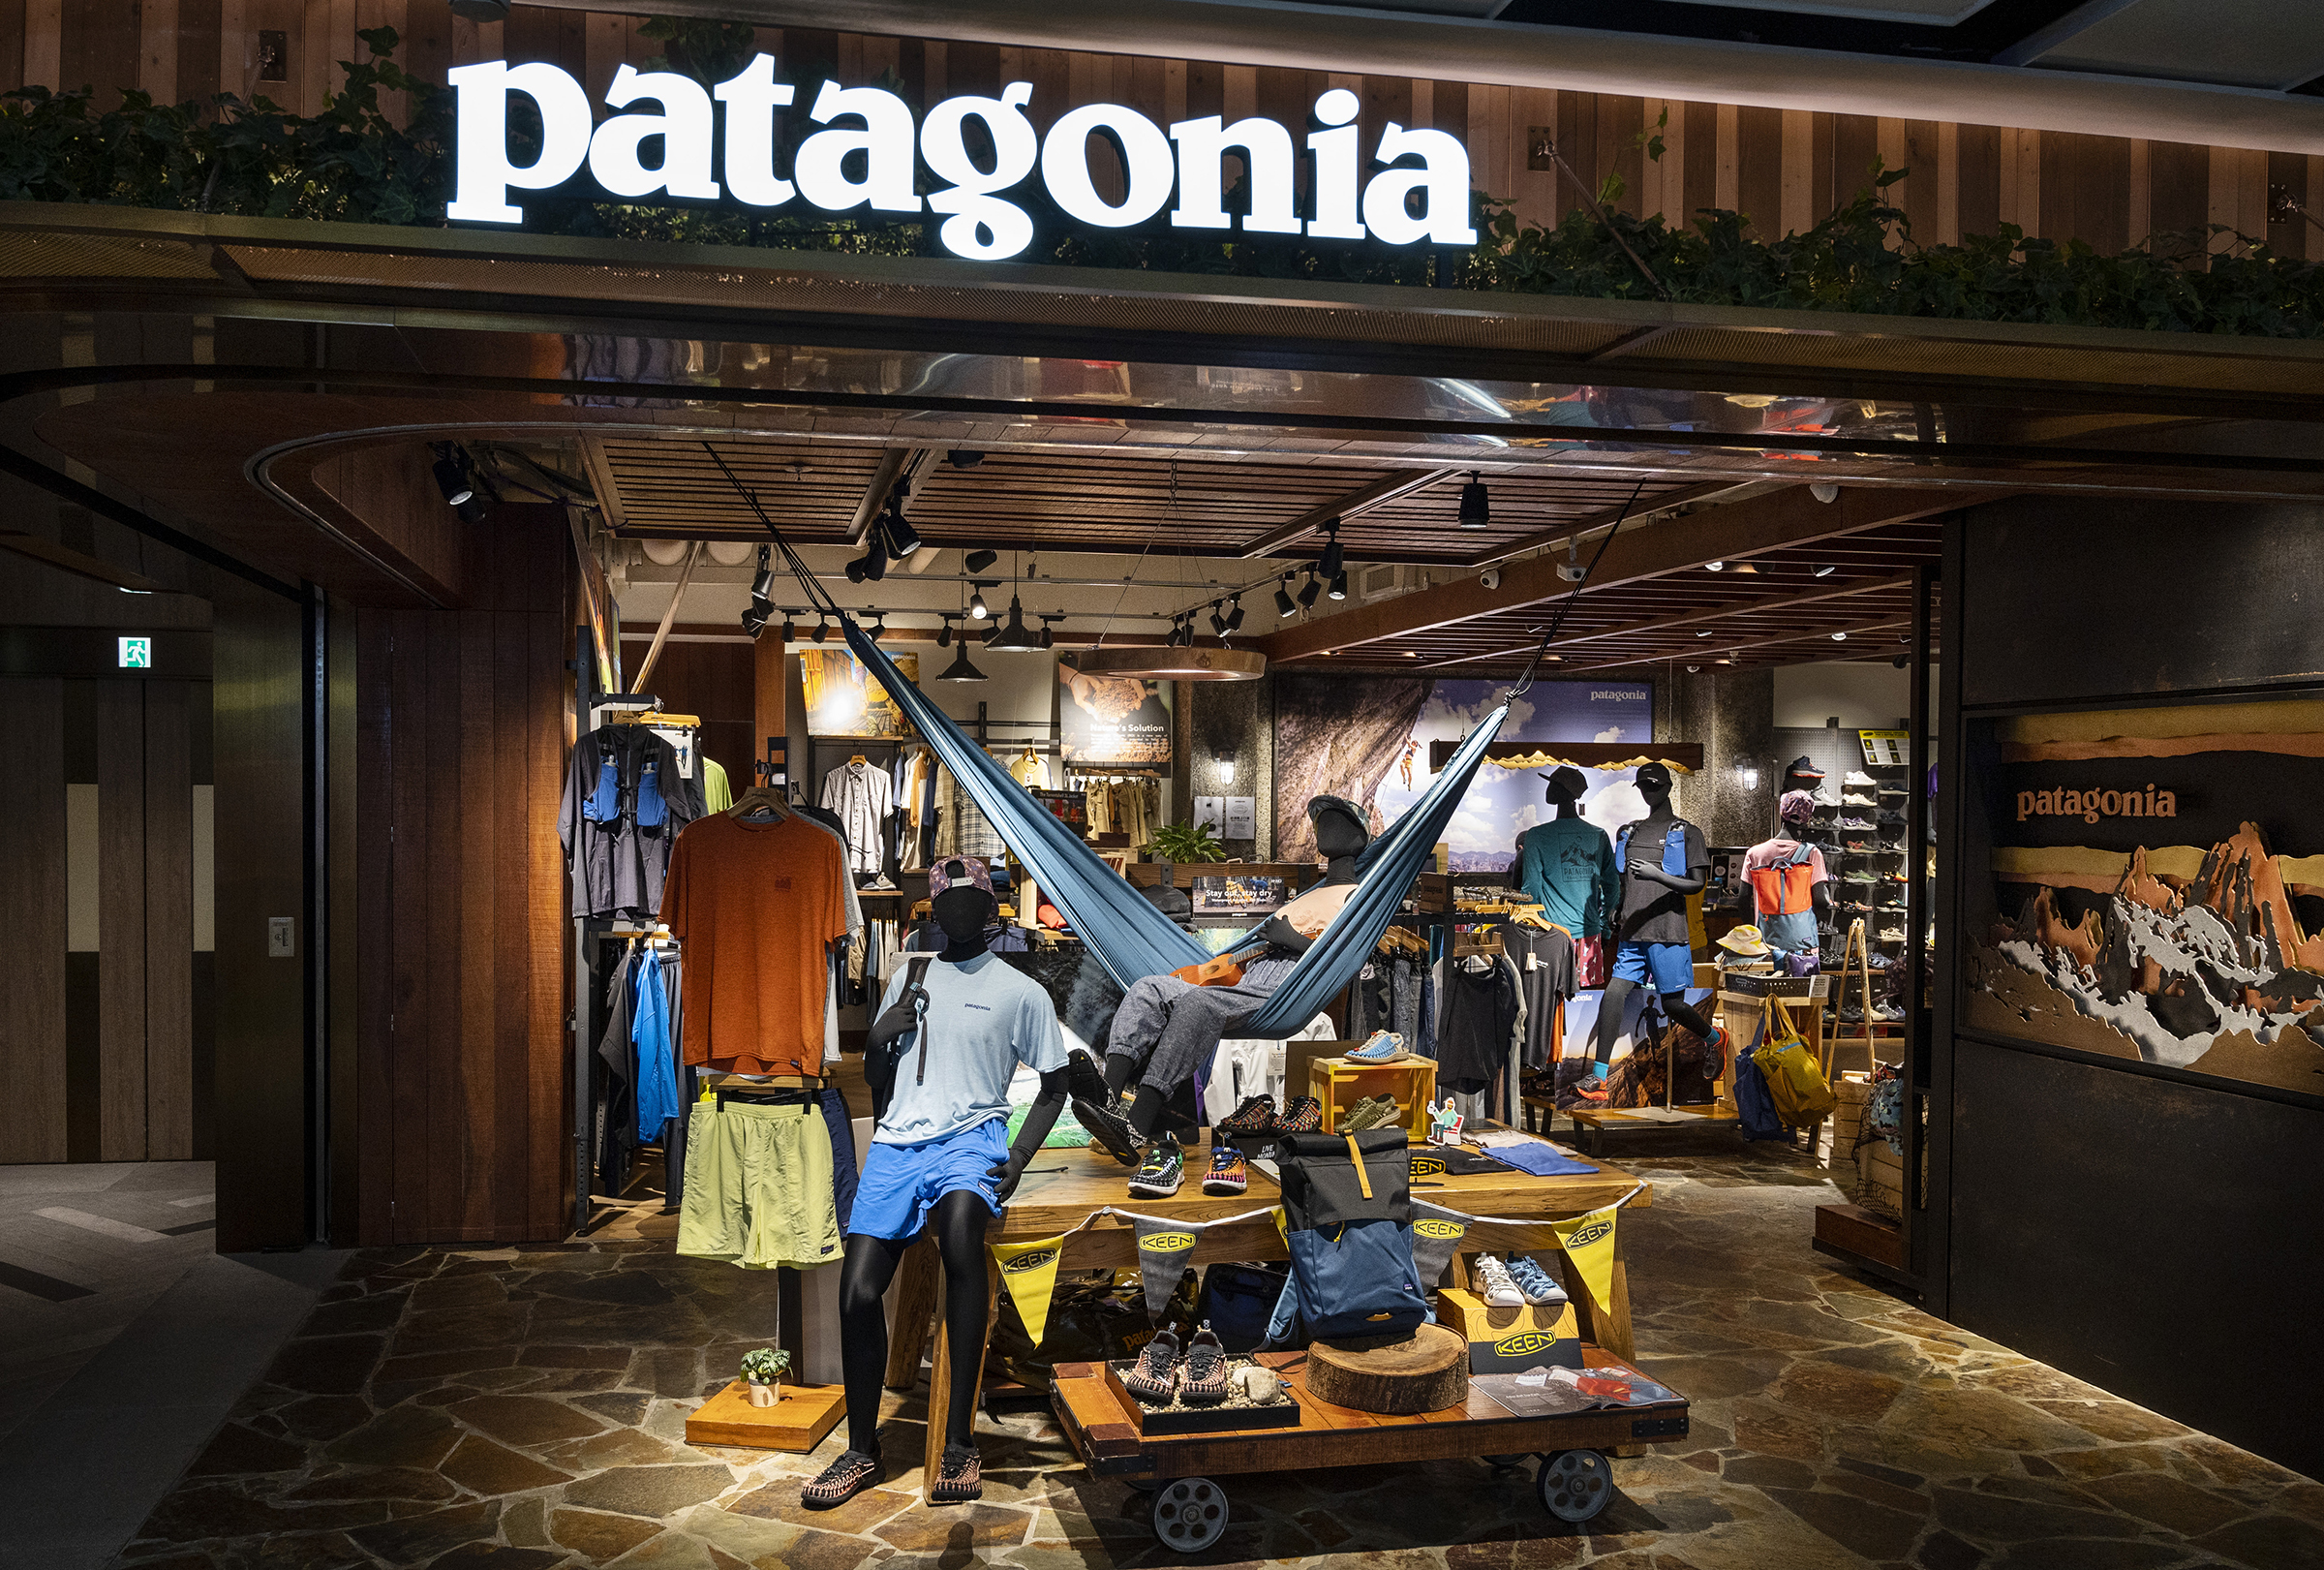 American outdoor clothing brand company Patagonia store seen in Hong Kong. (Budrul Chukrut—SOPA/Getty Images)